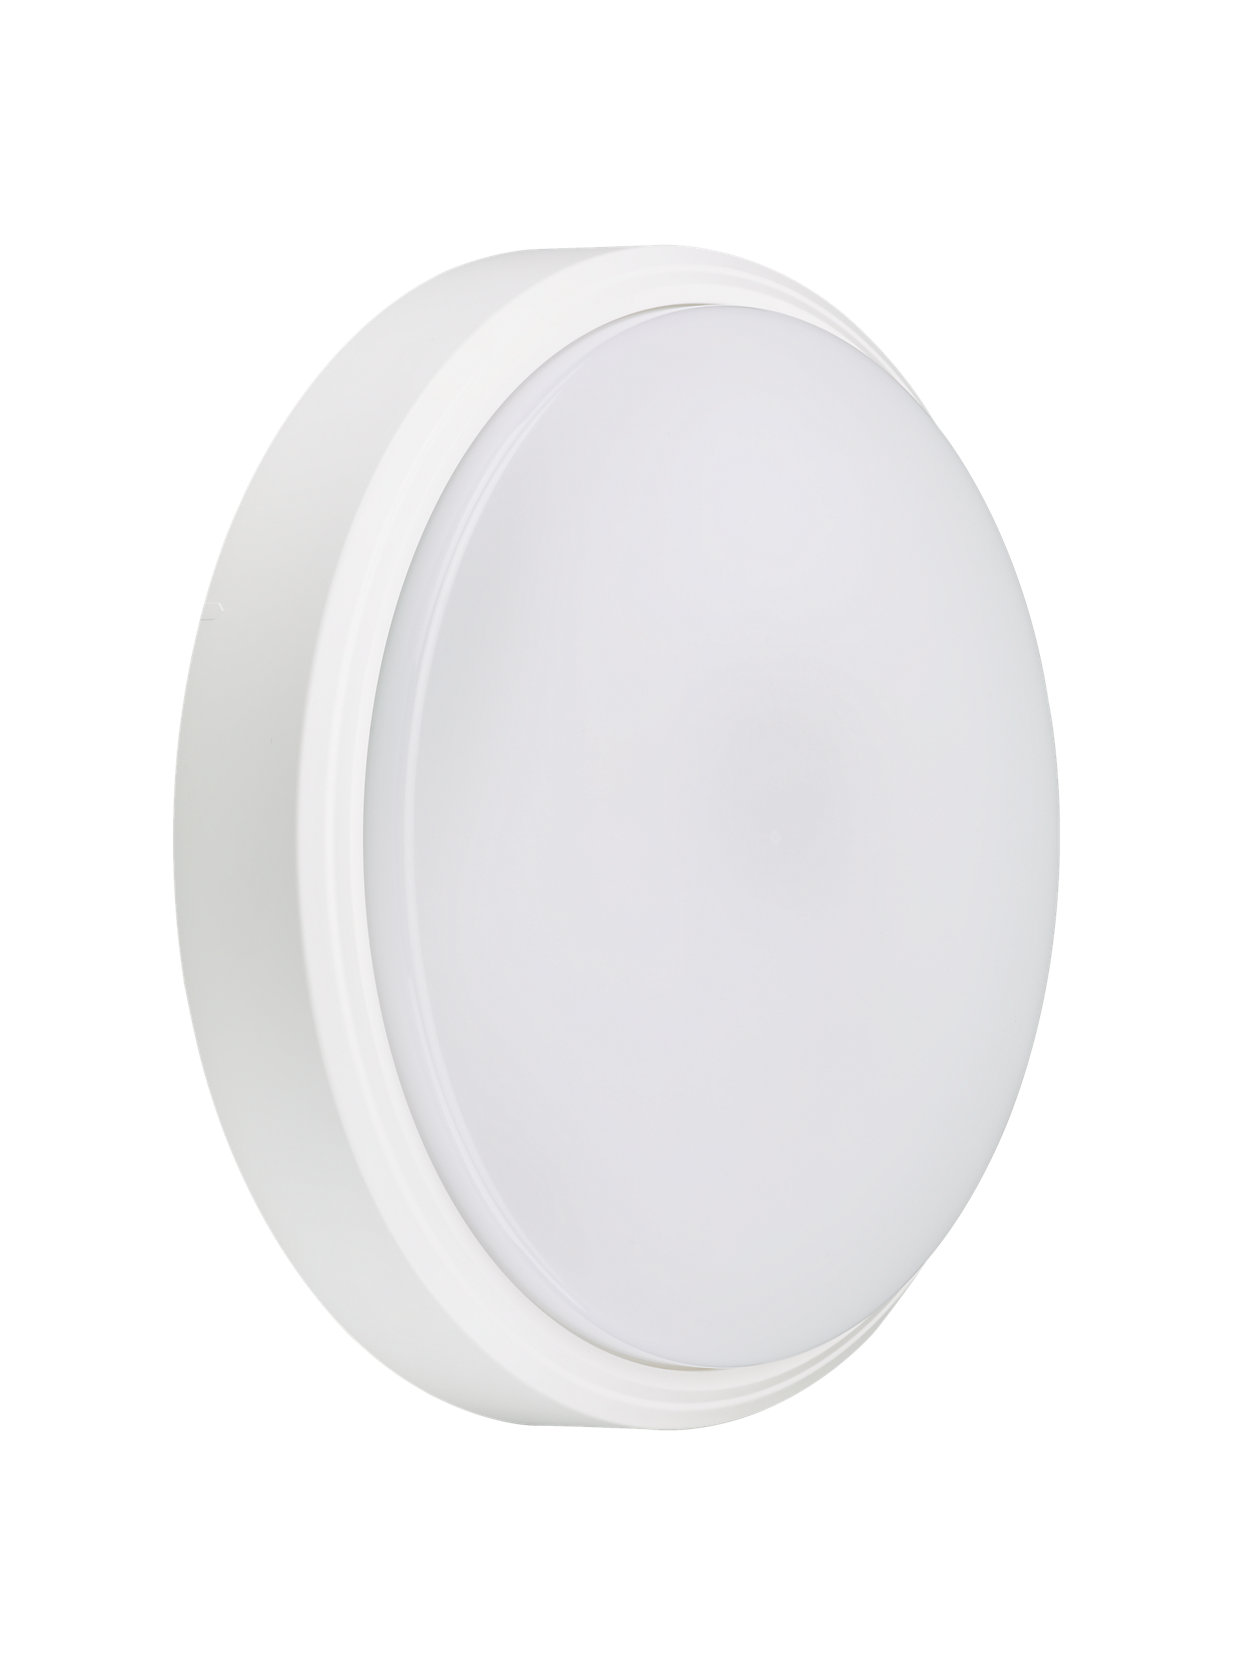 CoreLine Wall-mounted – the clear choice for LED